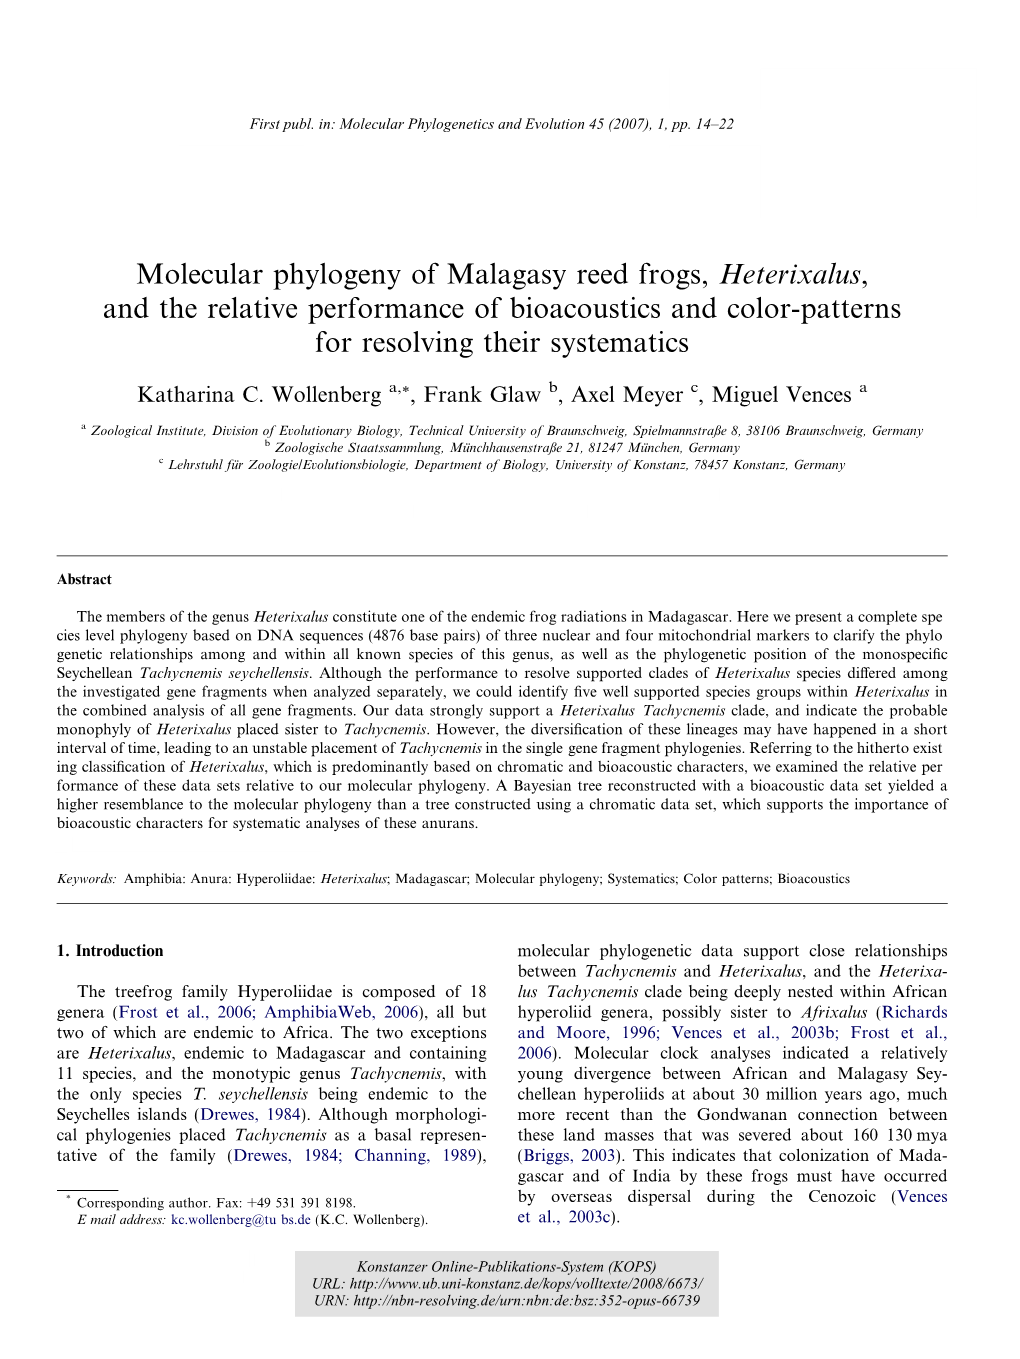 Molecular Phylogeny of Malagasy Reed Frogs, Heterixalus, and the Relative Performance of Bioacoustics and Color-Patterns for Resolving Their Systematics